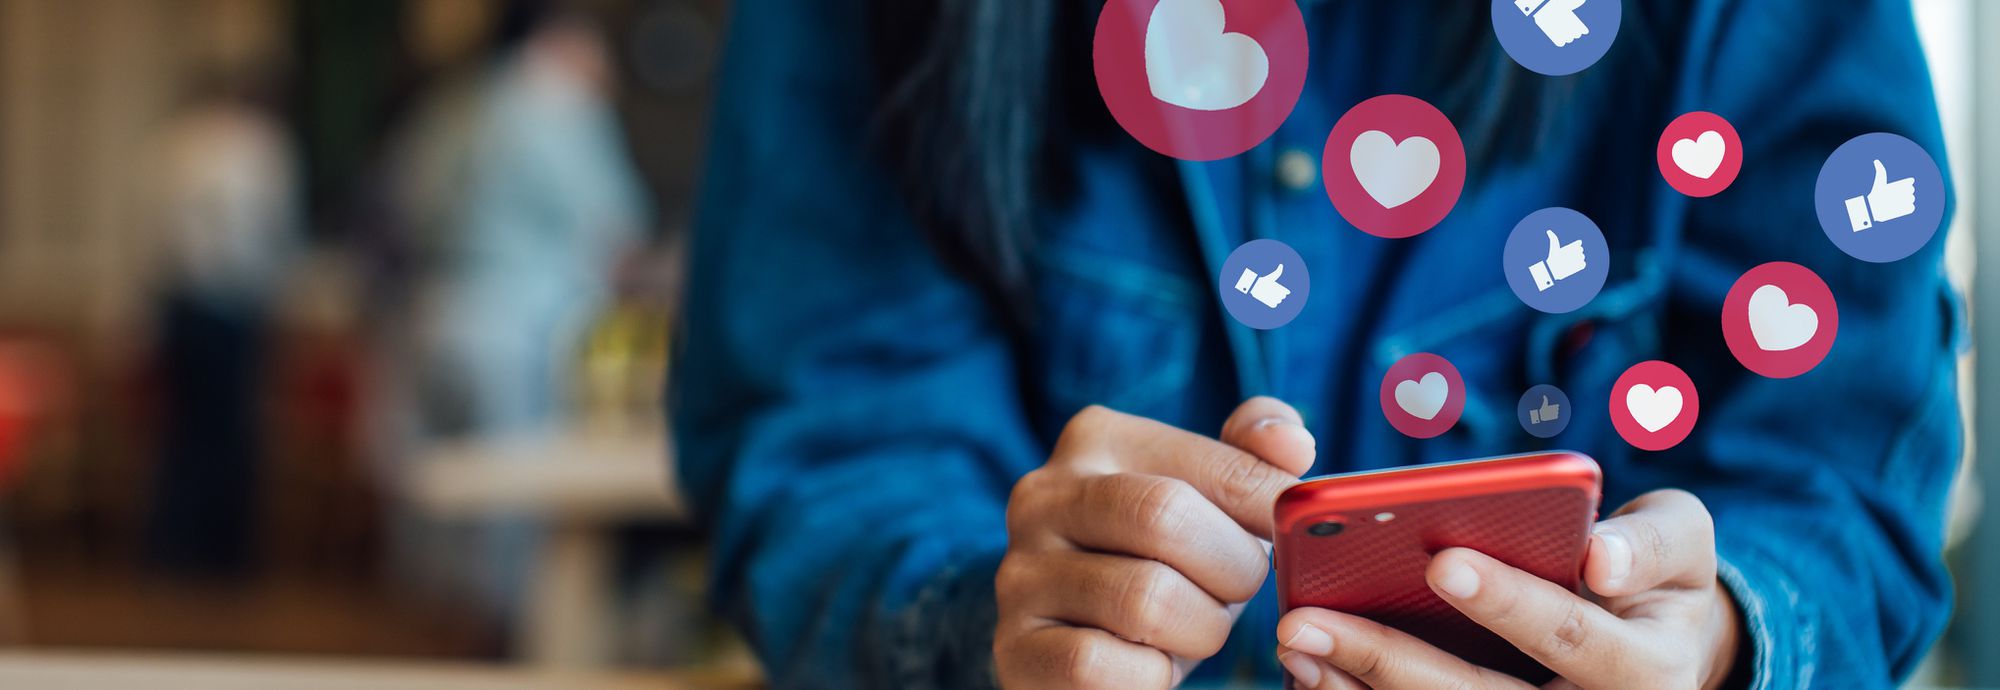 Floating hearts and thumbs-up symbols over a person holding a smartphone.